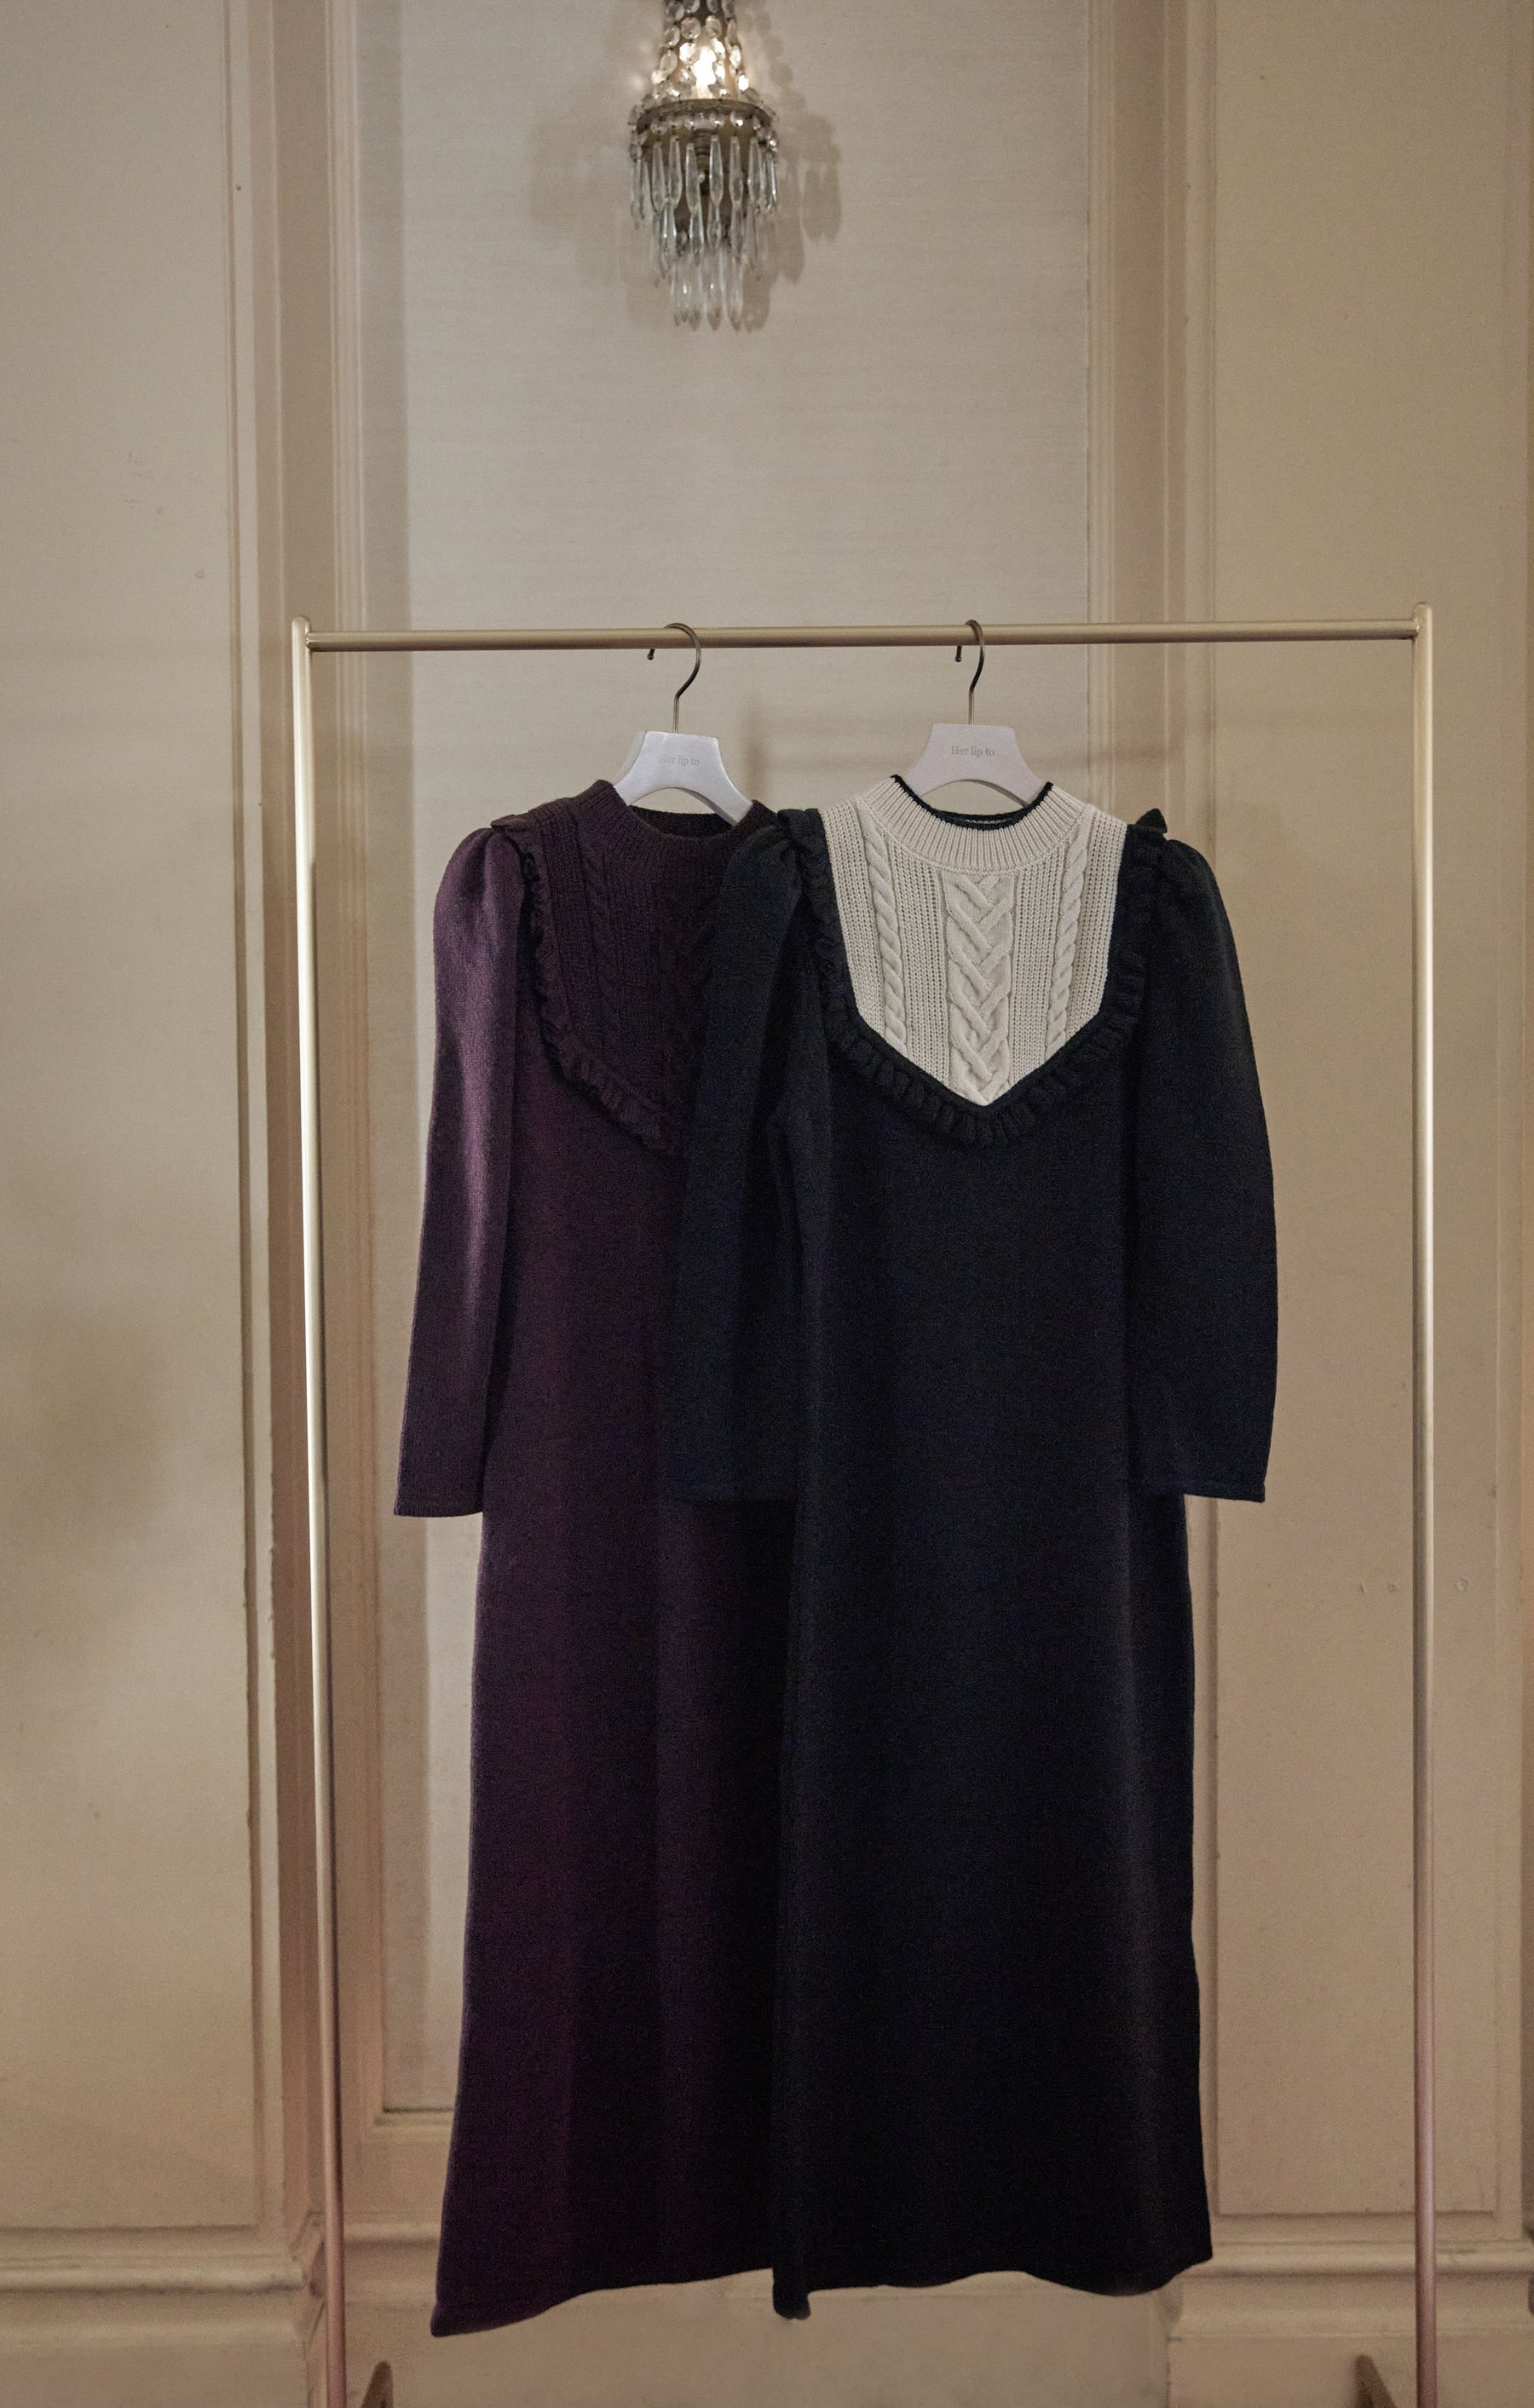 SNIDEL - みっと様専用☆herlipto Belted Ruffle Cable-Knitの+spbgp44.ru